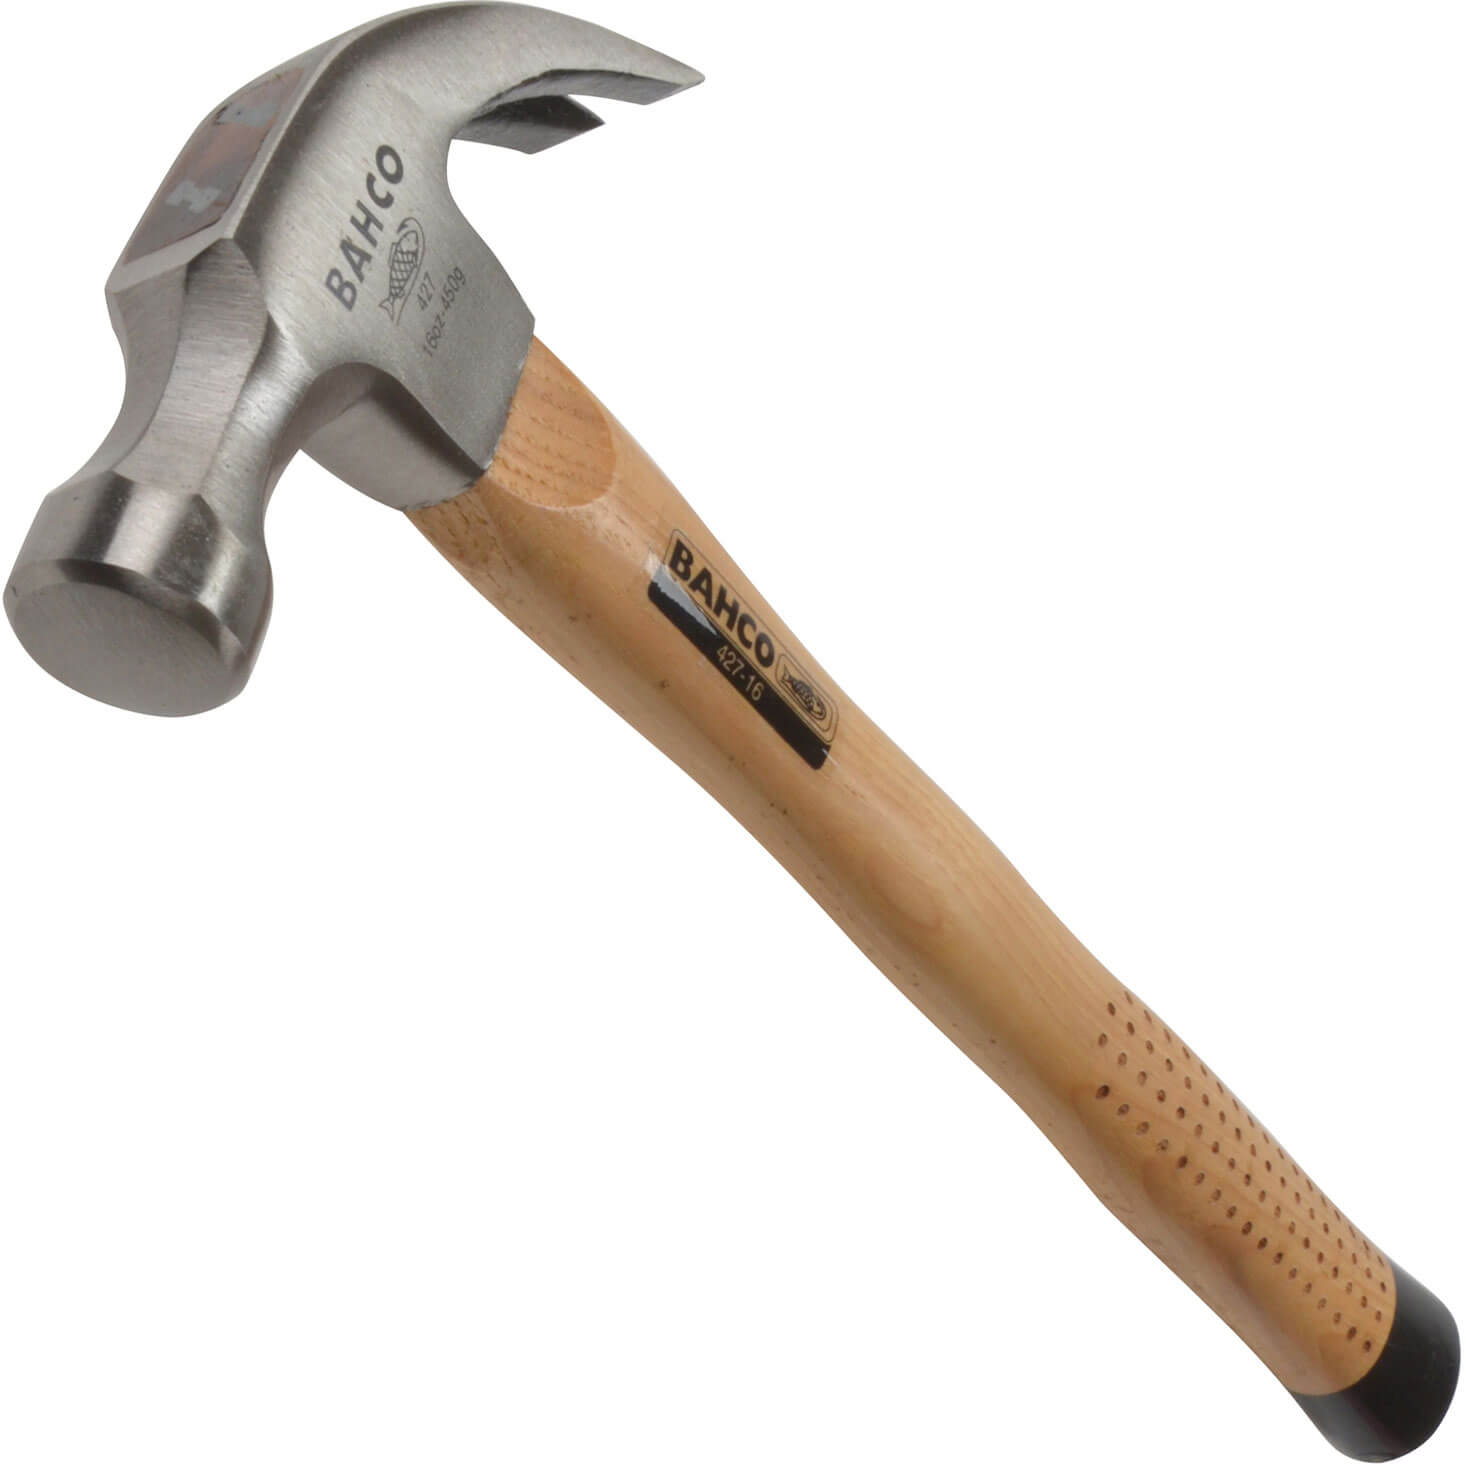 Image of Bahco Claw Hammer Hickory Handle 16oz